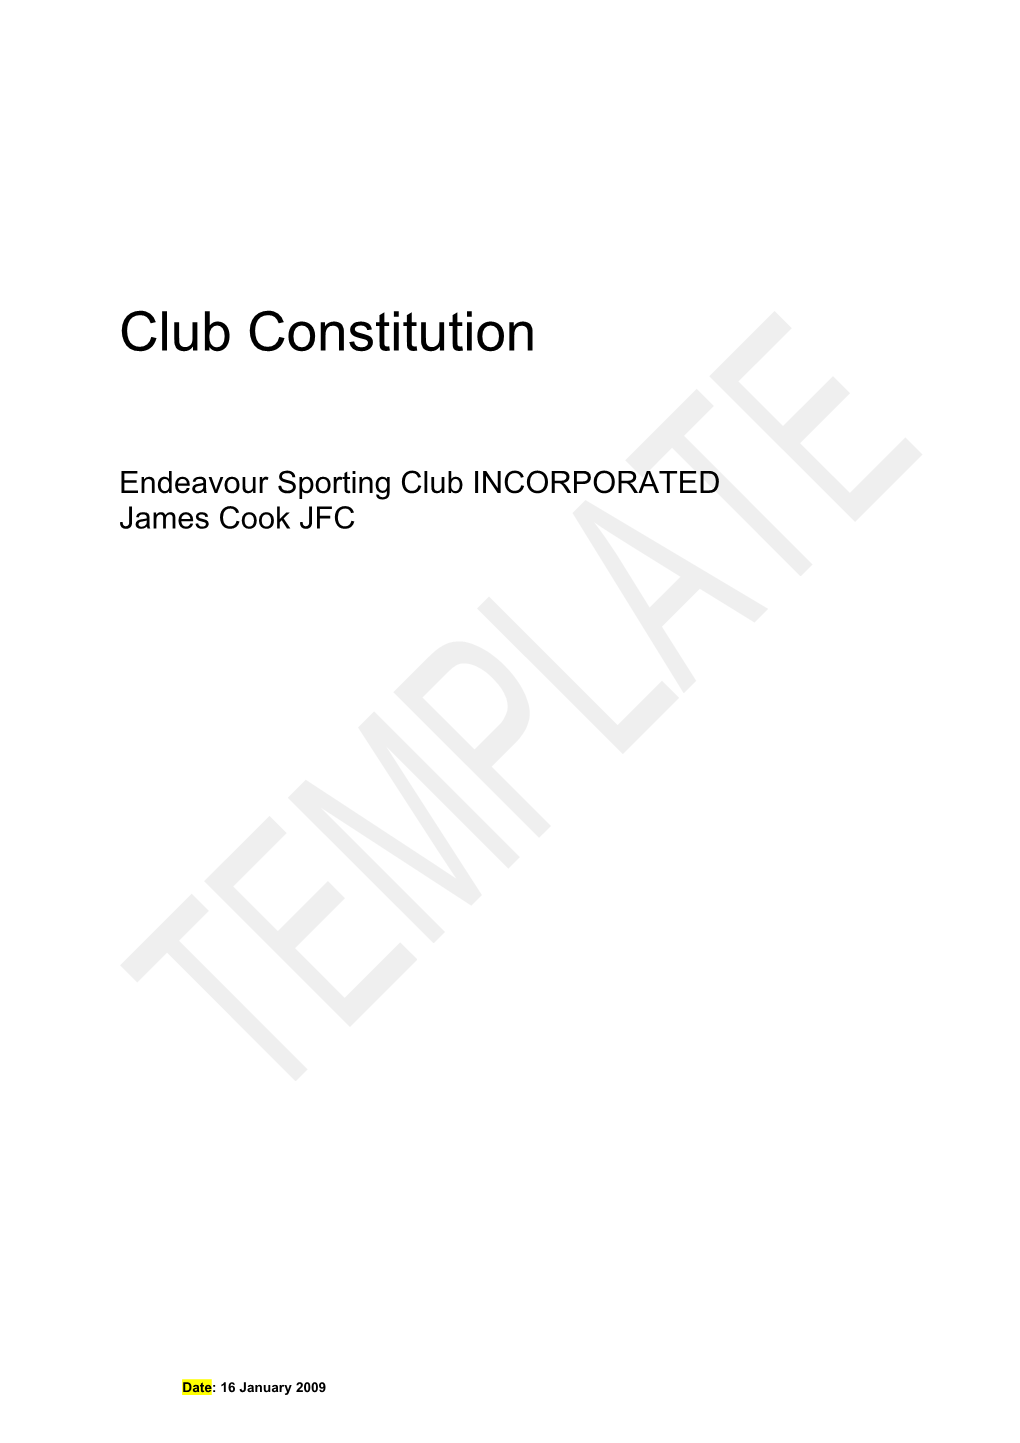 Endeavour Sporting Club INCORPORATED